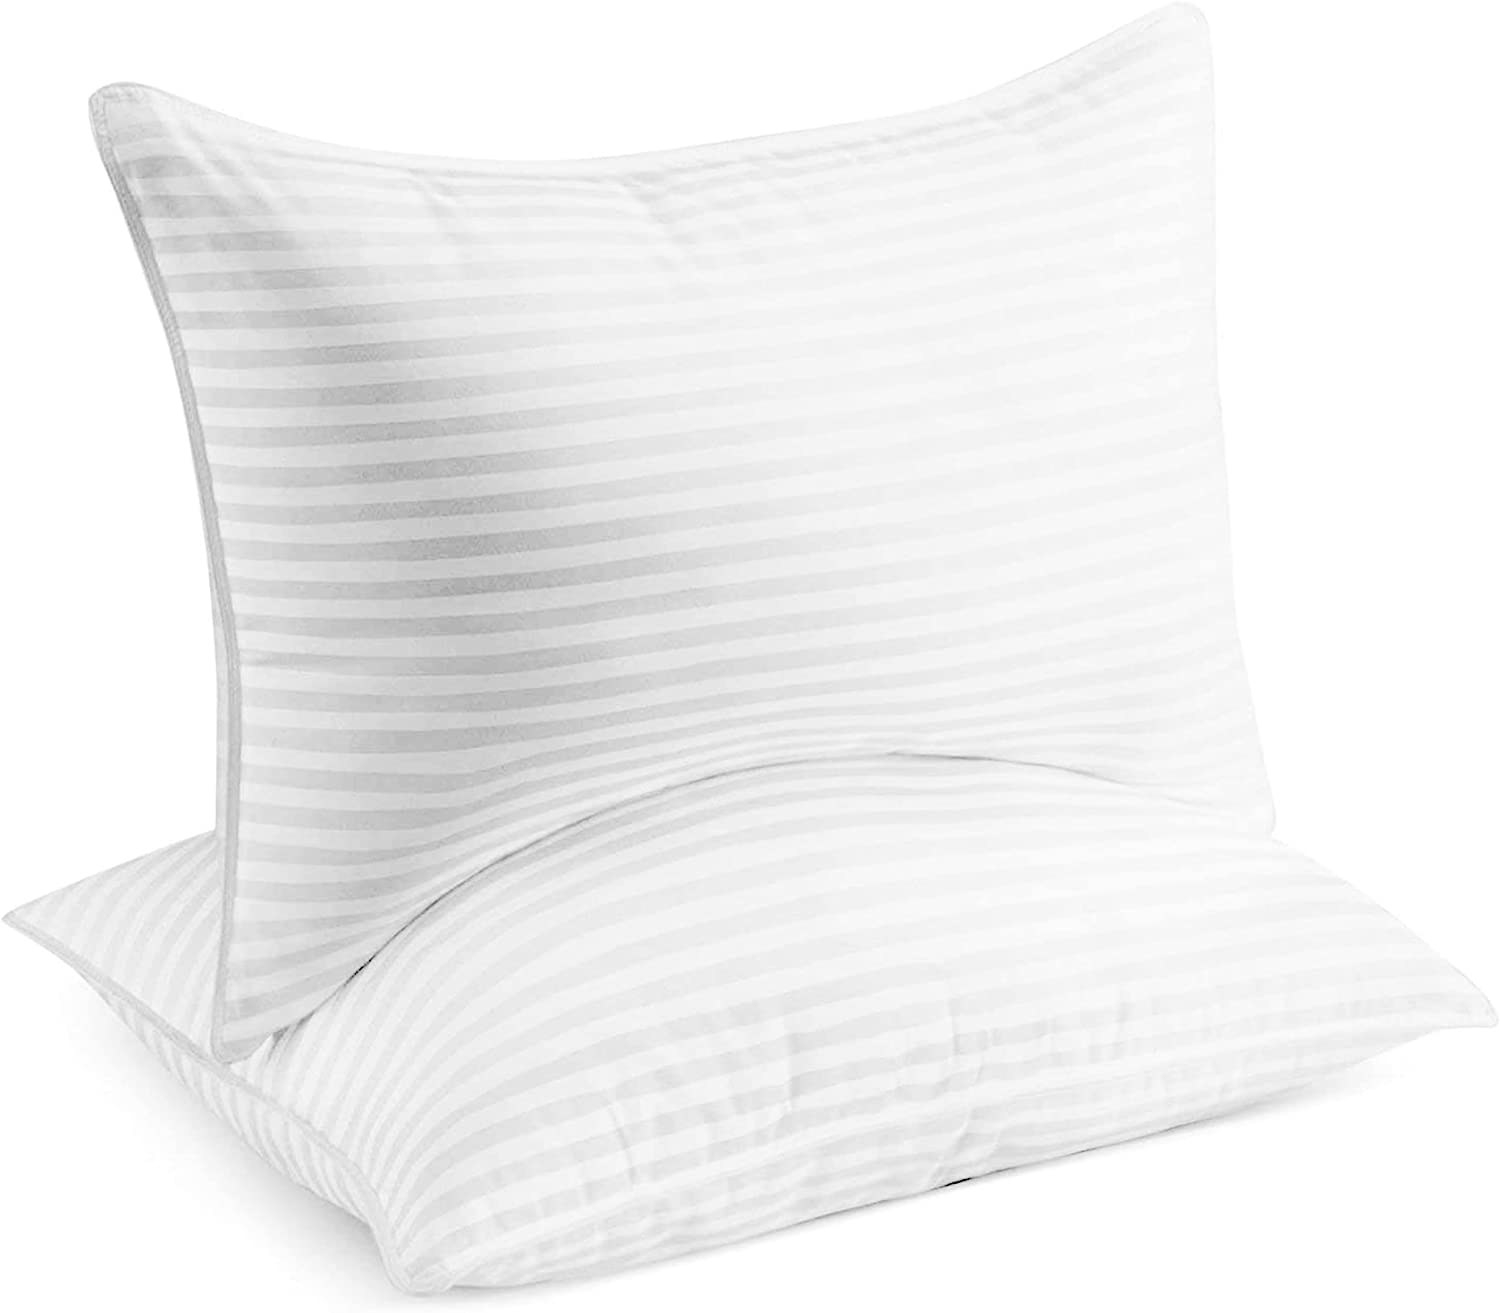 Two fully pillows with horizontal, light gray stripes